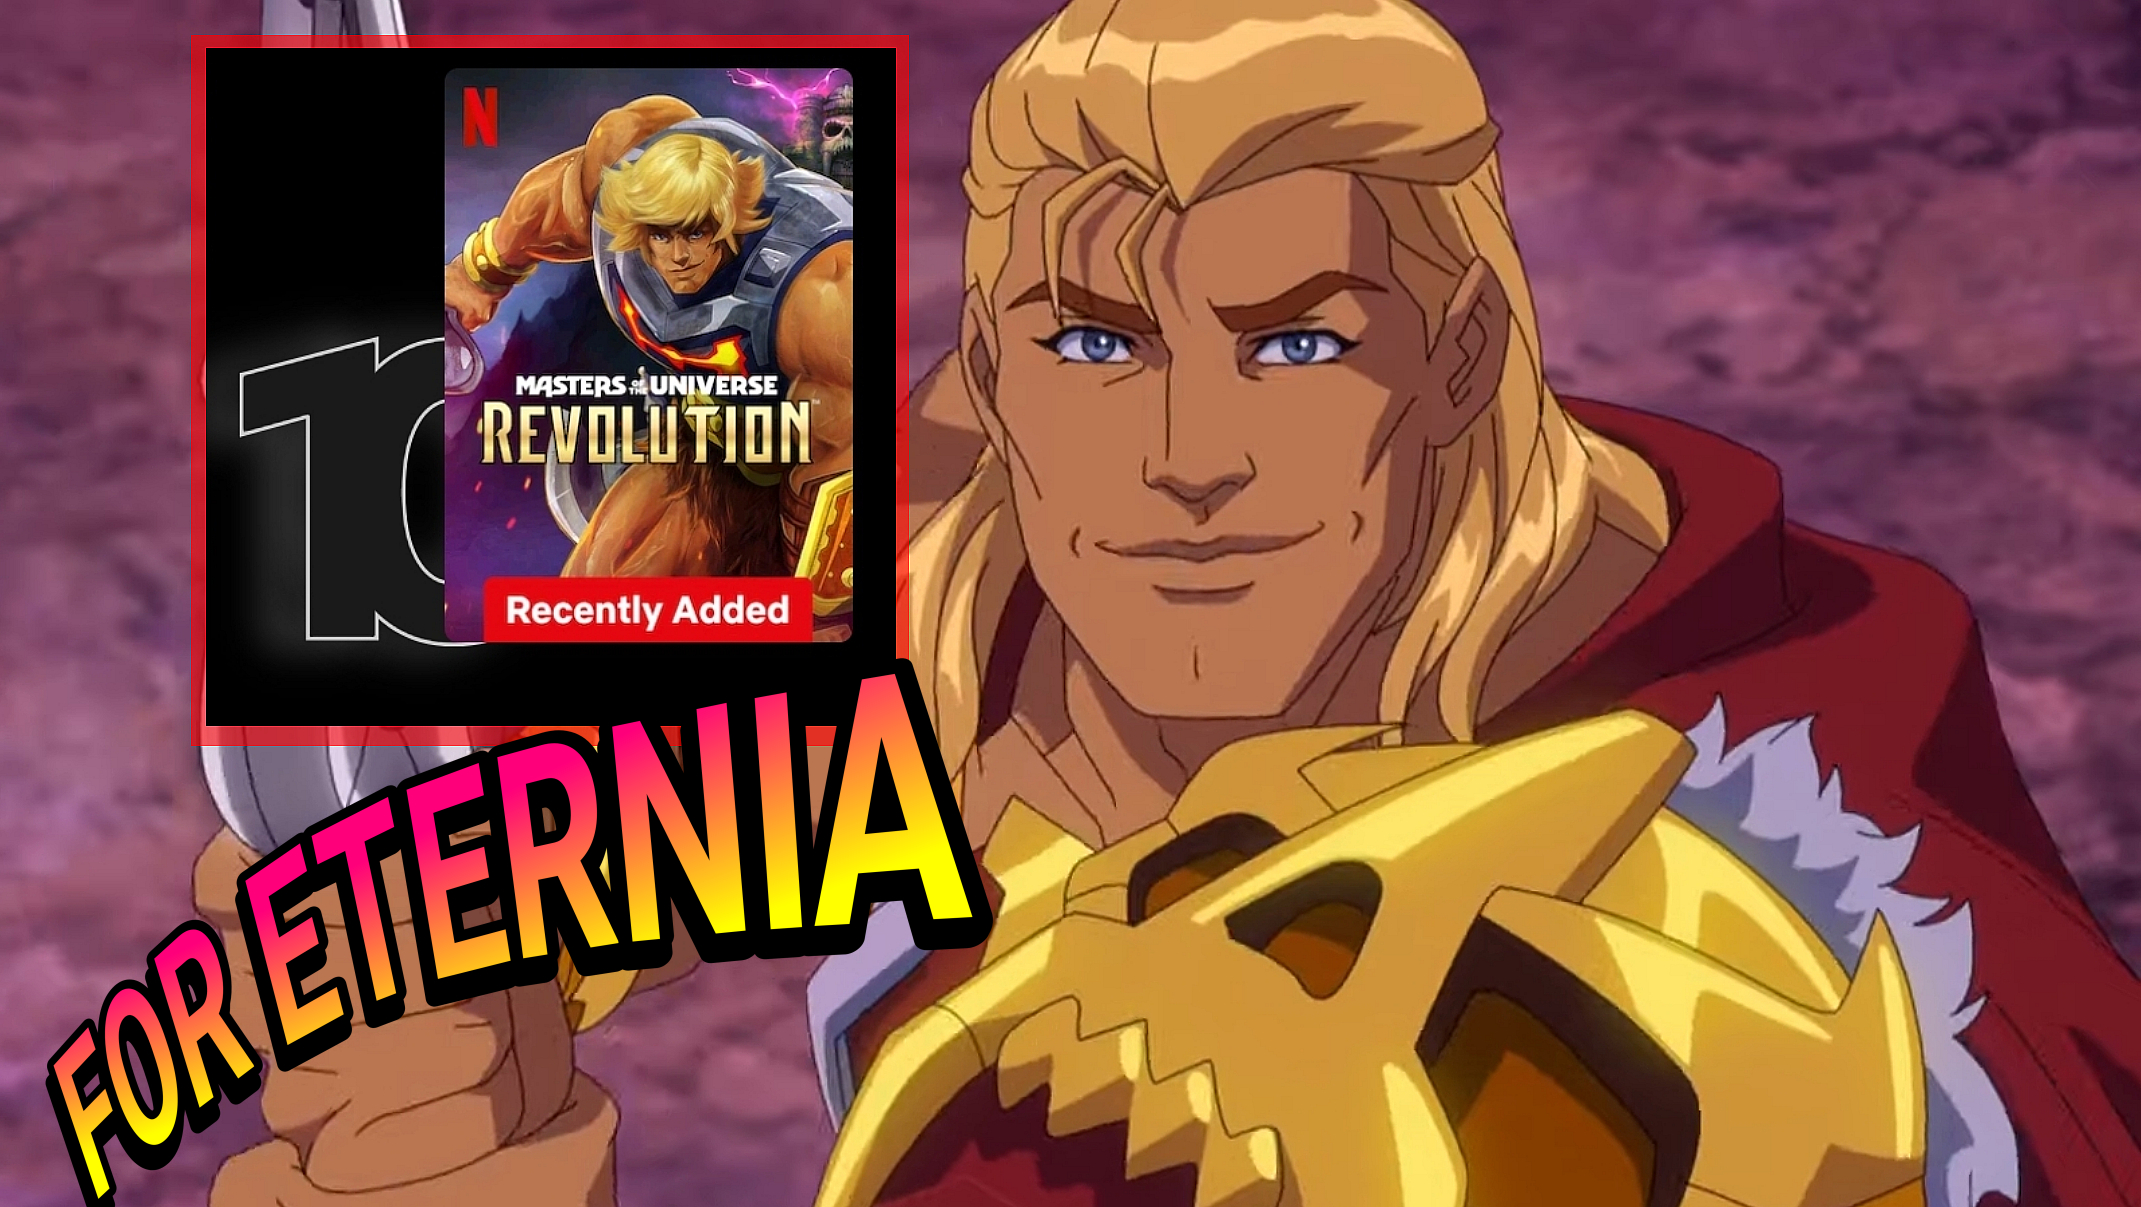 Holding Out for a Hero! ”Masters of the Universe: Revolution” makes the U.S. Top 10 for a sixth day in a row